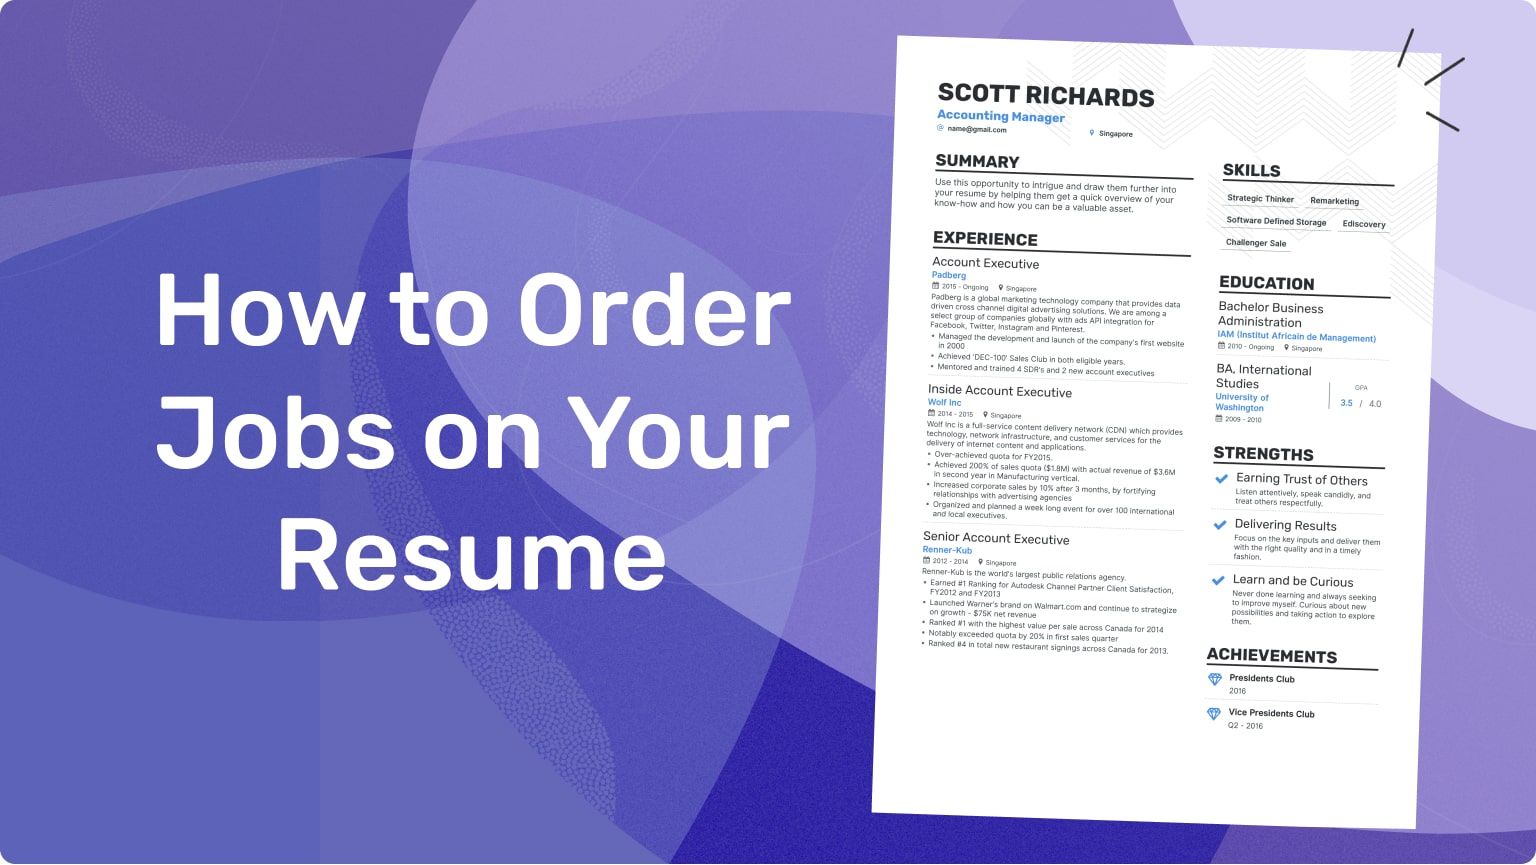 Resume Order of Jobs – Does it Matter?